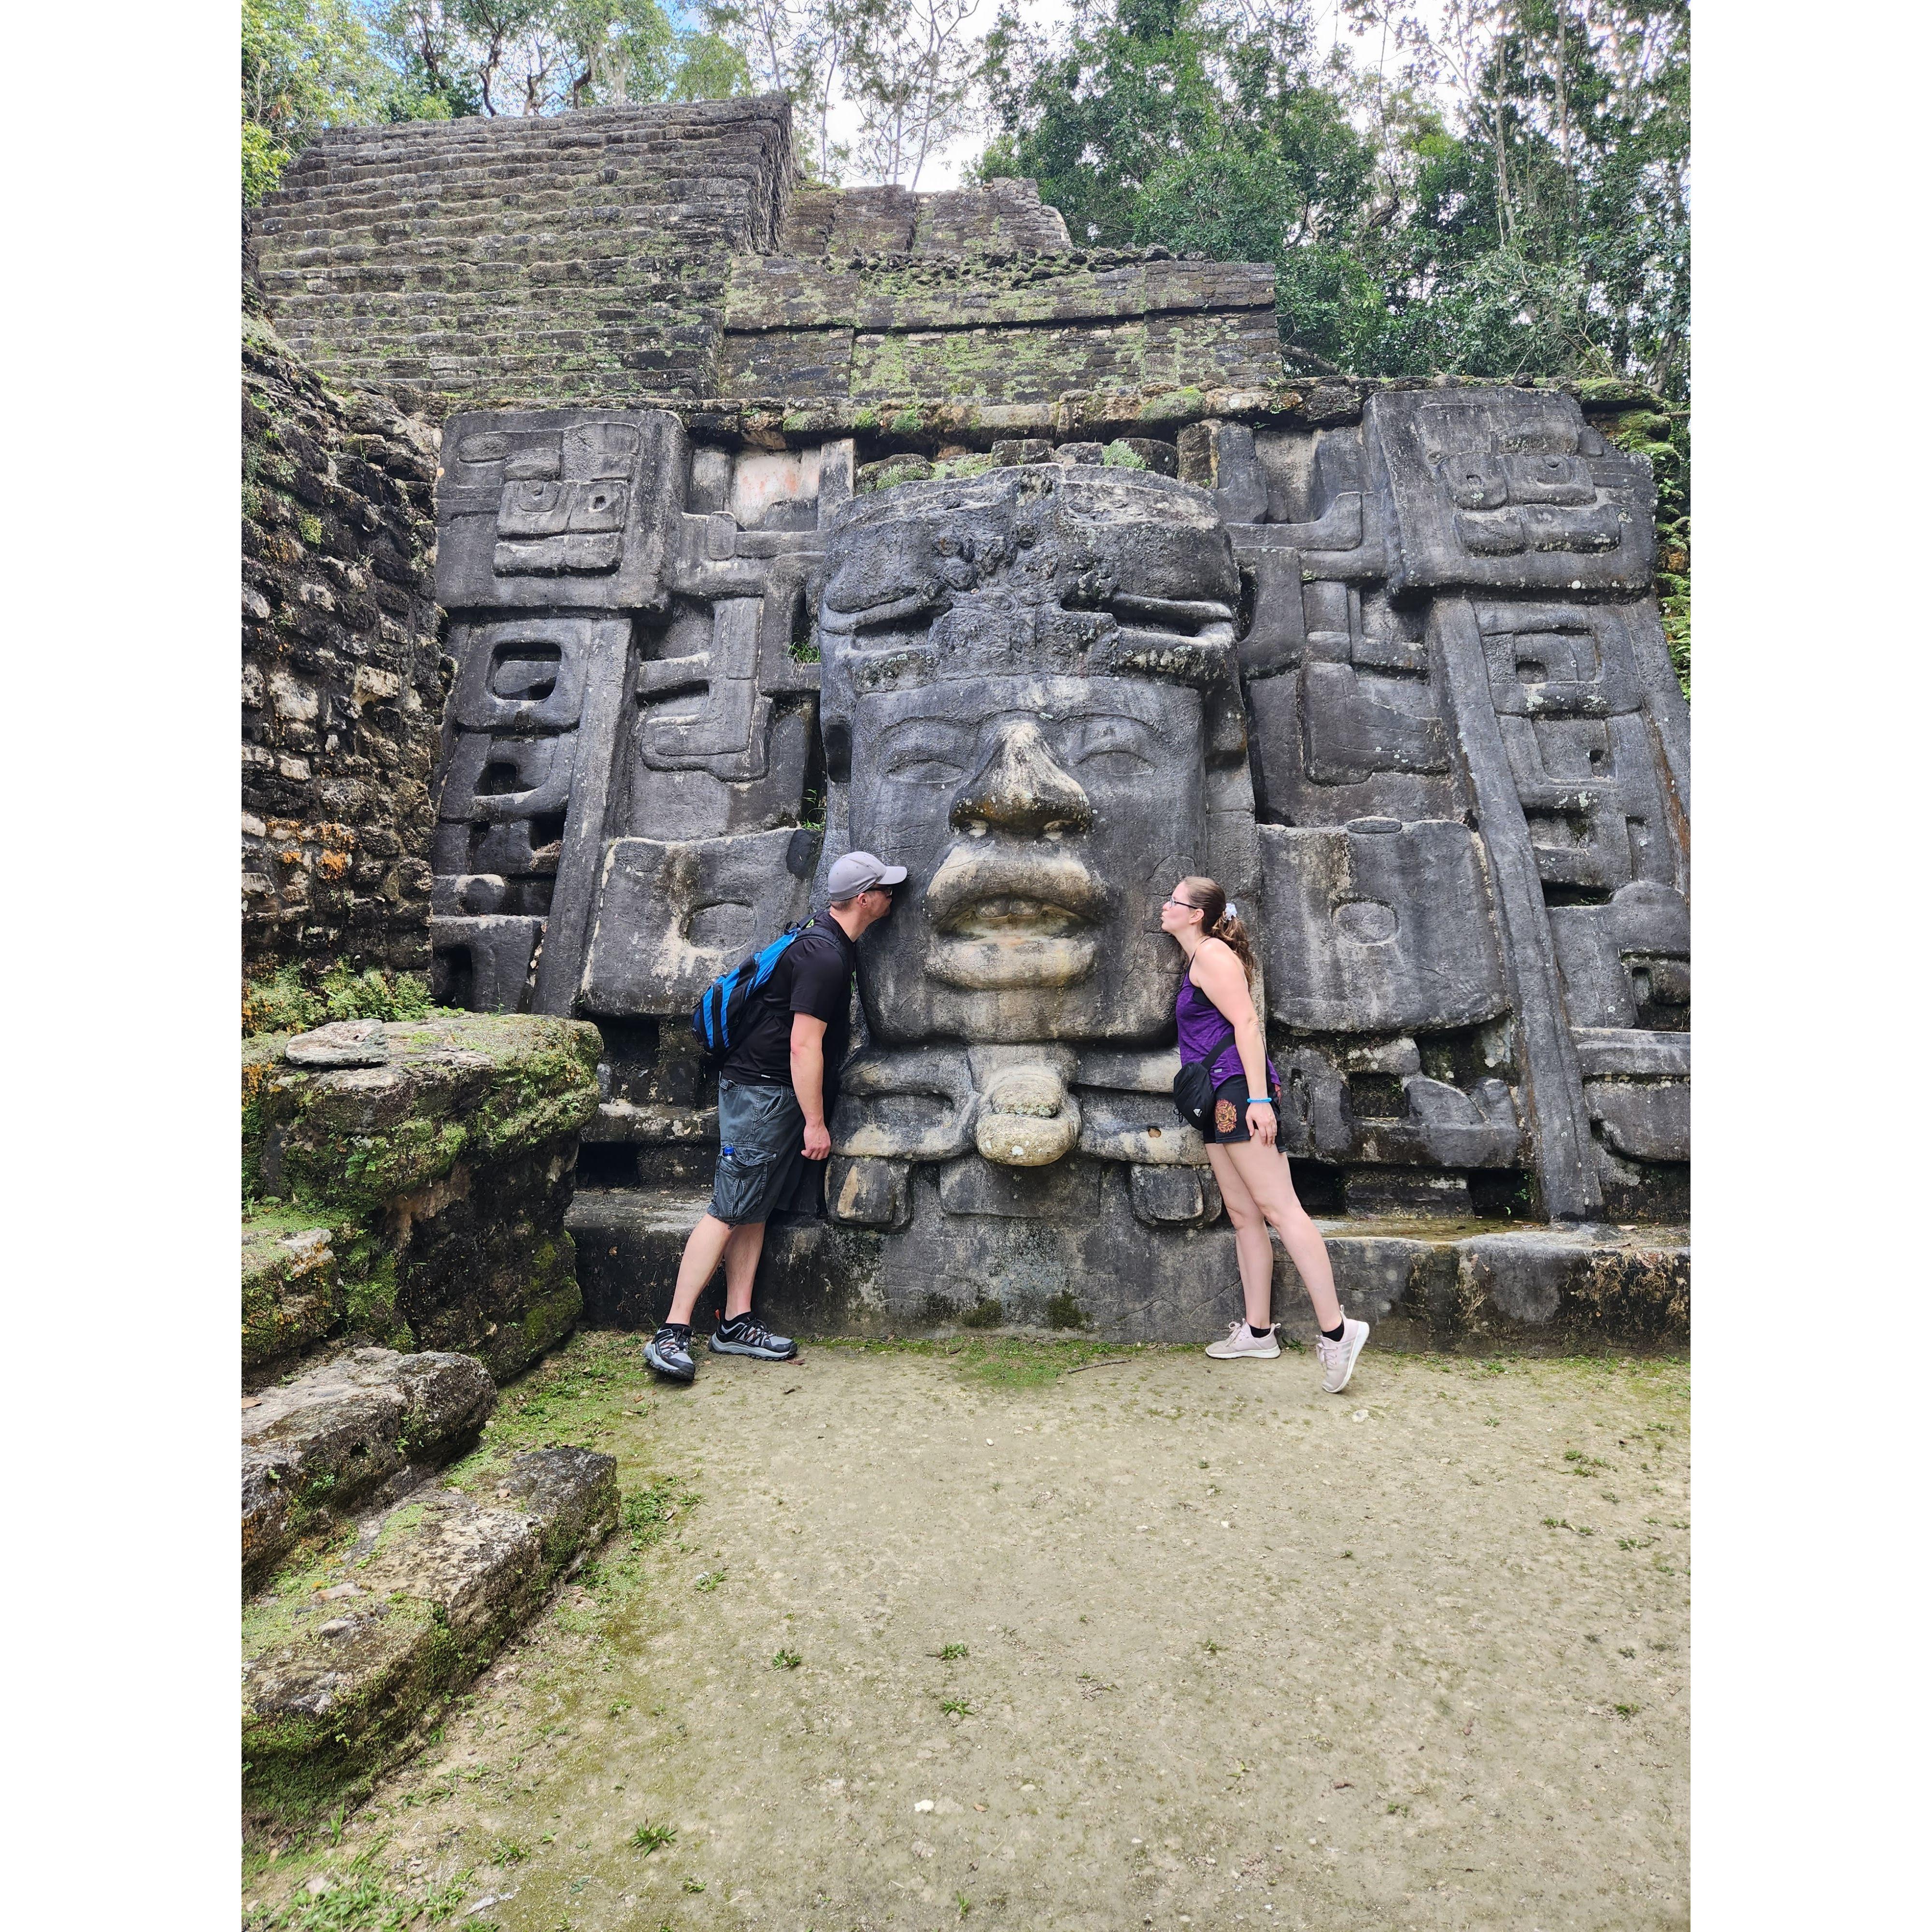 This is my favorite photo of us from Belize ;)